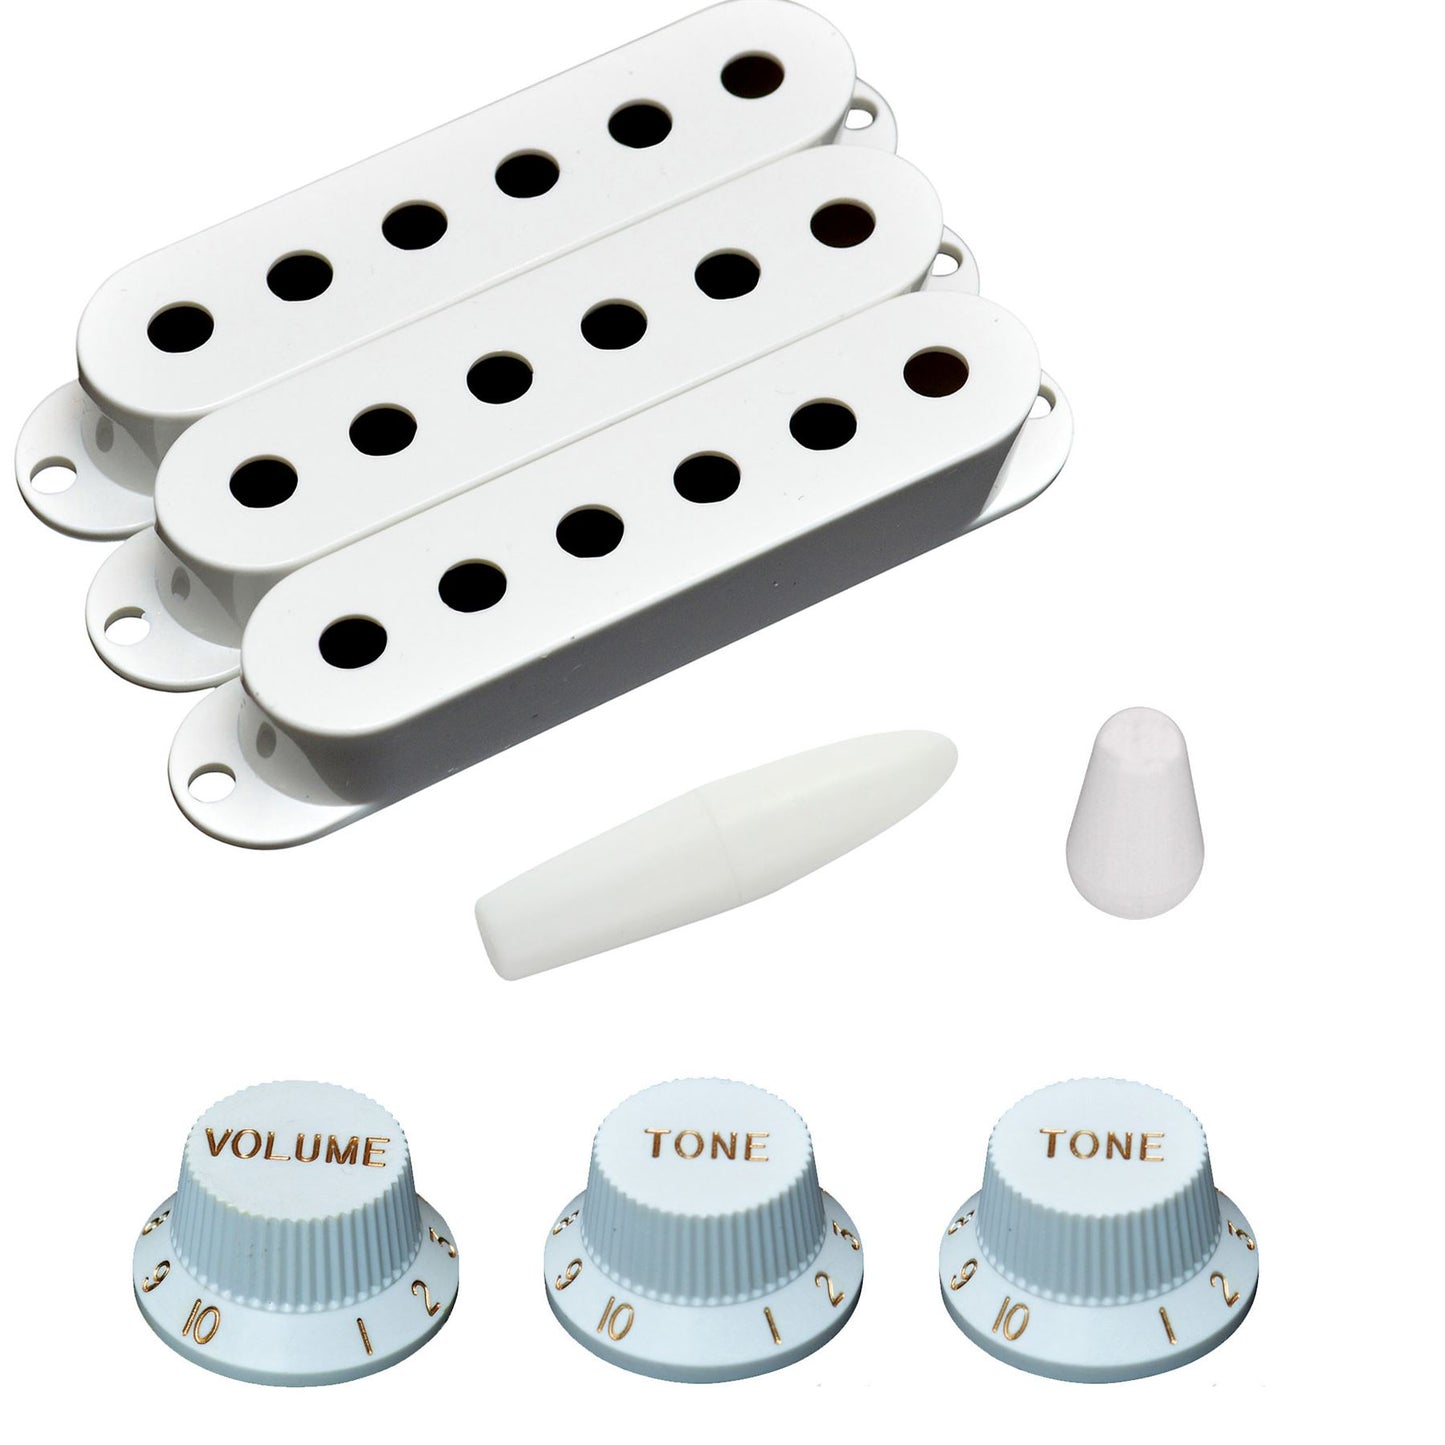 Accessory Kit for Stratocaster